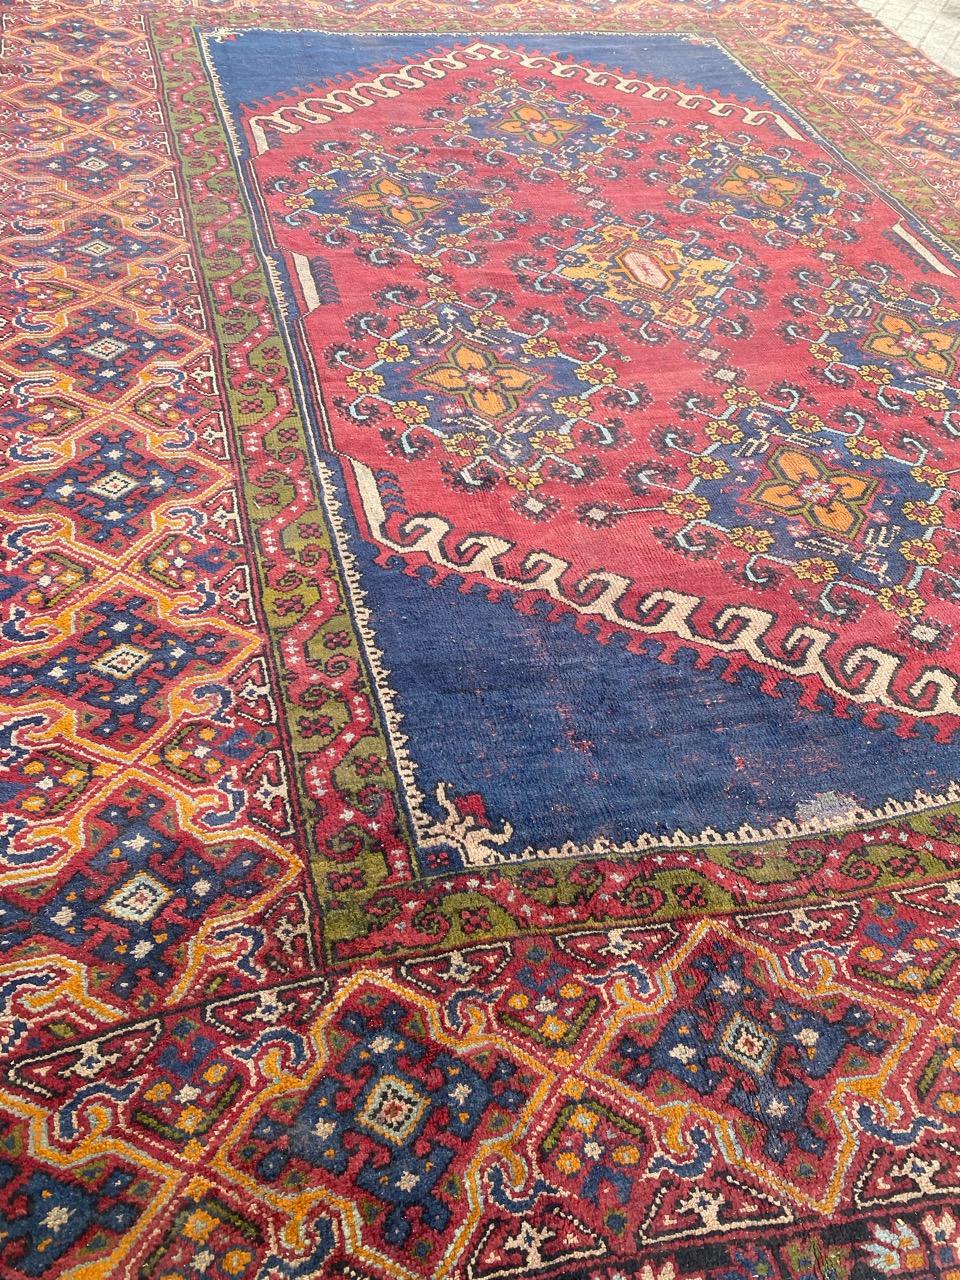 Pretty palace size late 19th century Moroccan rug, with beautiful design in style of the antique oushak rugs and nice colors, entirely hand knotted with wool velvet on cotton foundation.

✨✨✨
